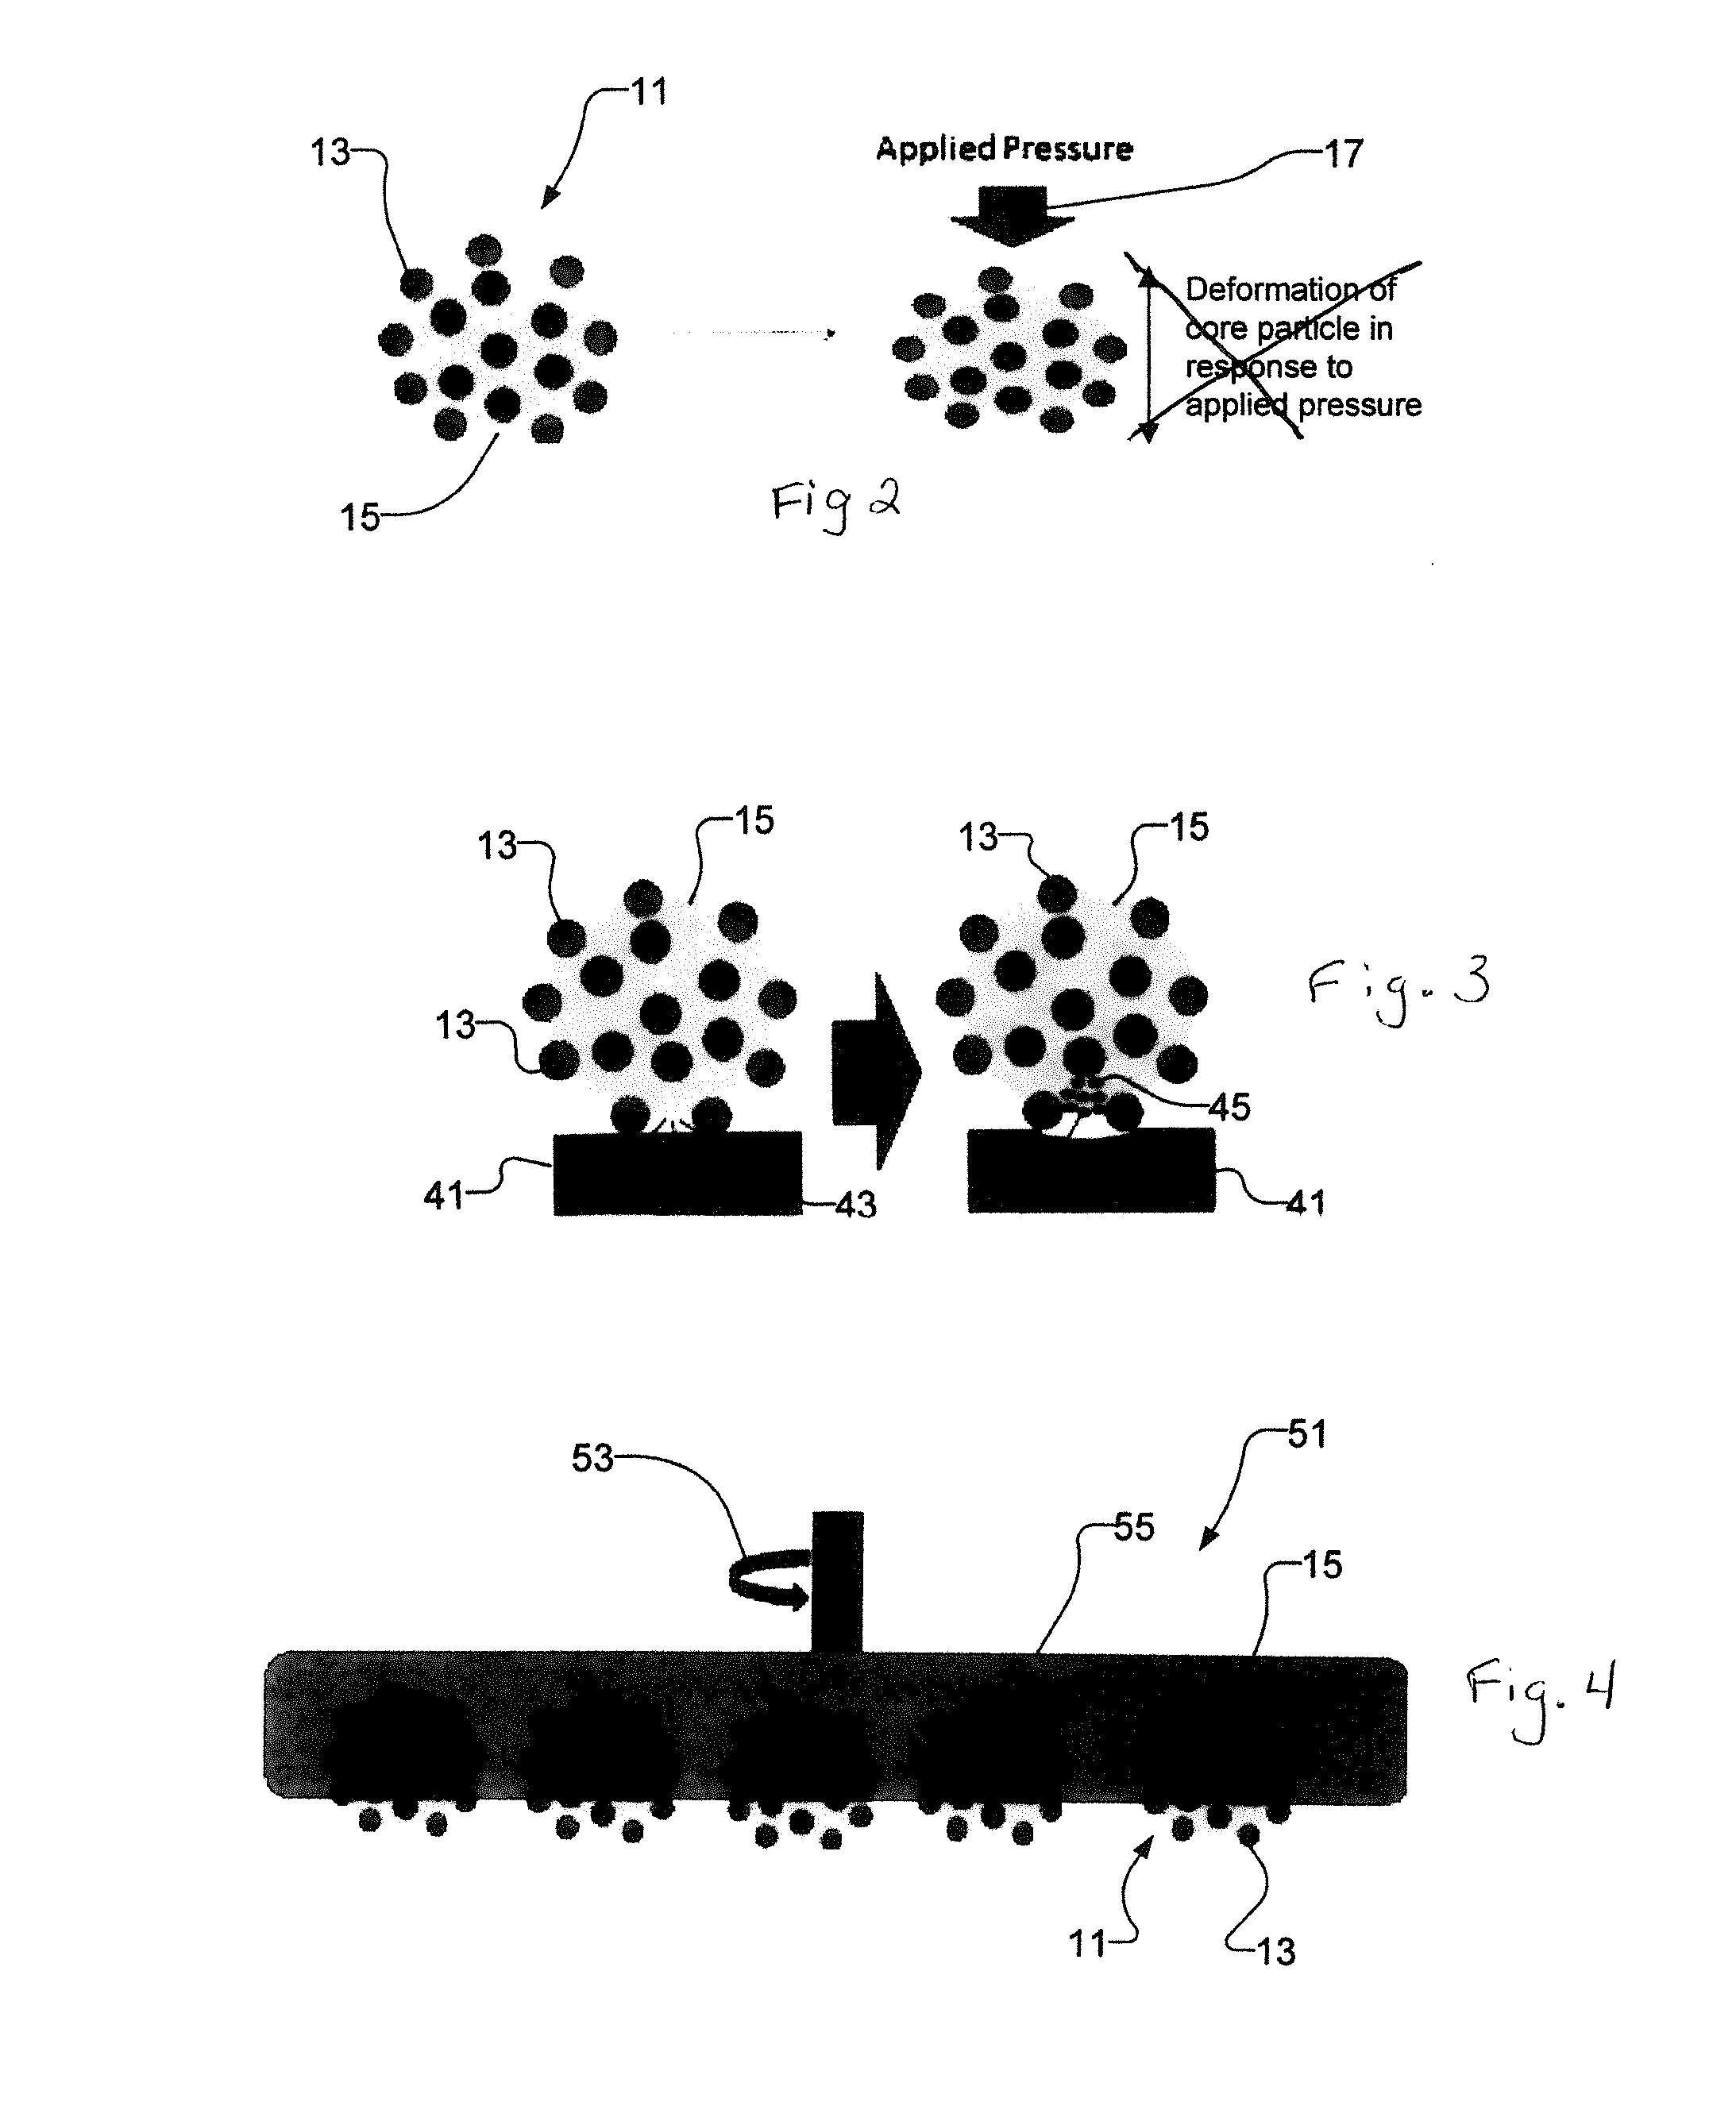 Chemical Mechanical Planarization Slurry Composition Comprising Composite Particles, Process for Removing Material Using Said Composition, CMP Polishing Pad and Process for Preparing Said Composition